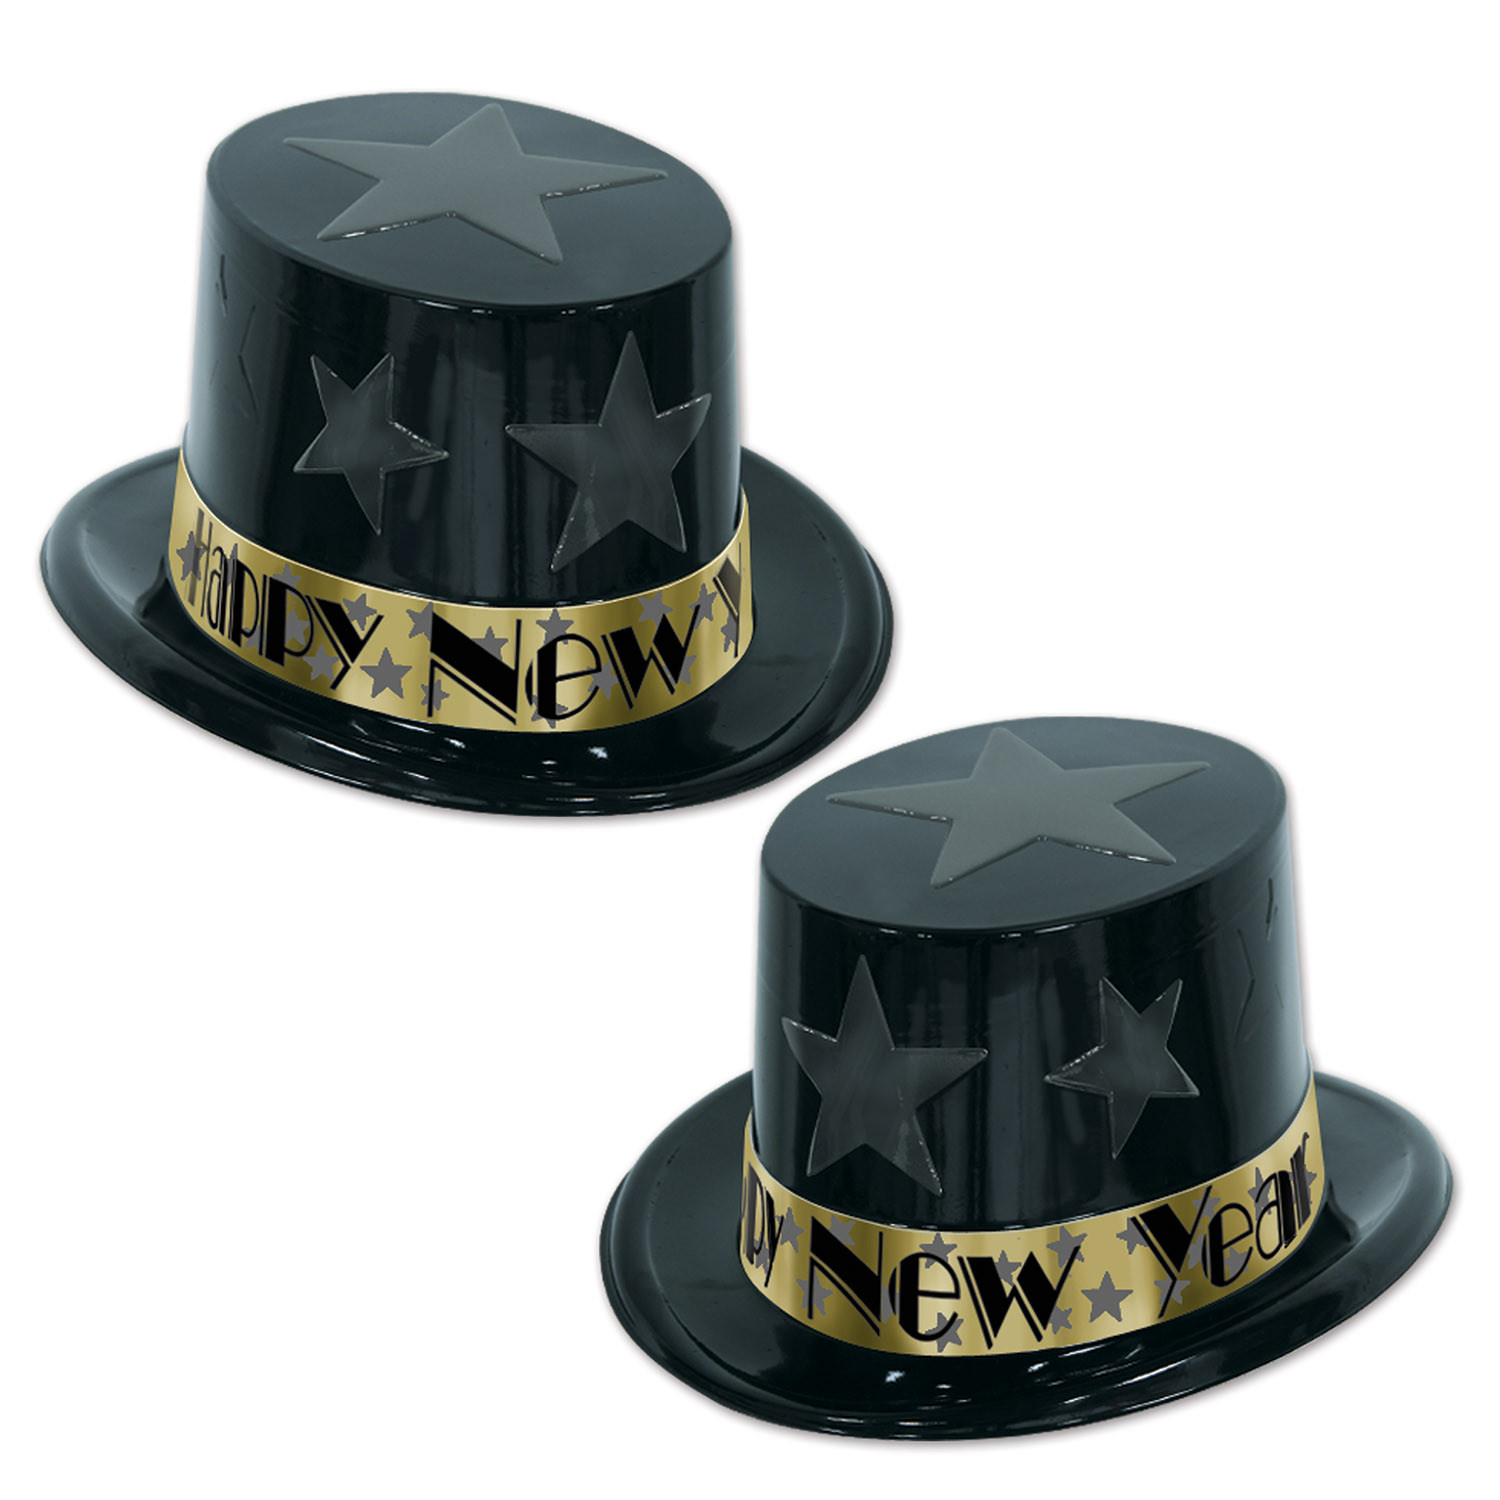 black and gold new years eve top hats with stars popping out of the plastic and gold happy new year bands